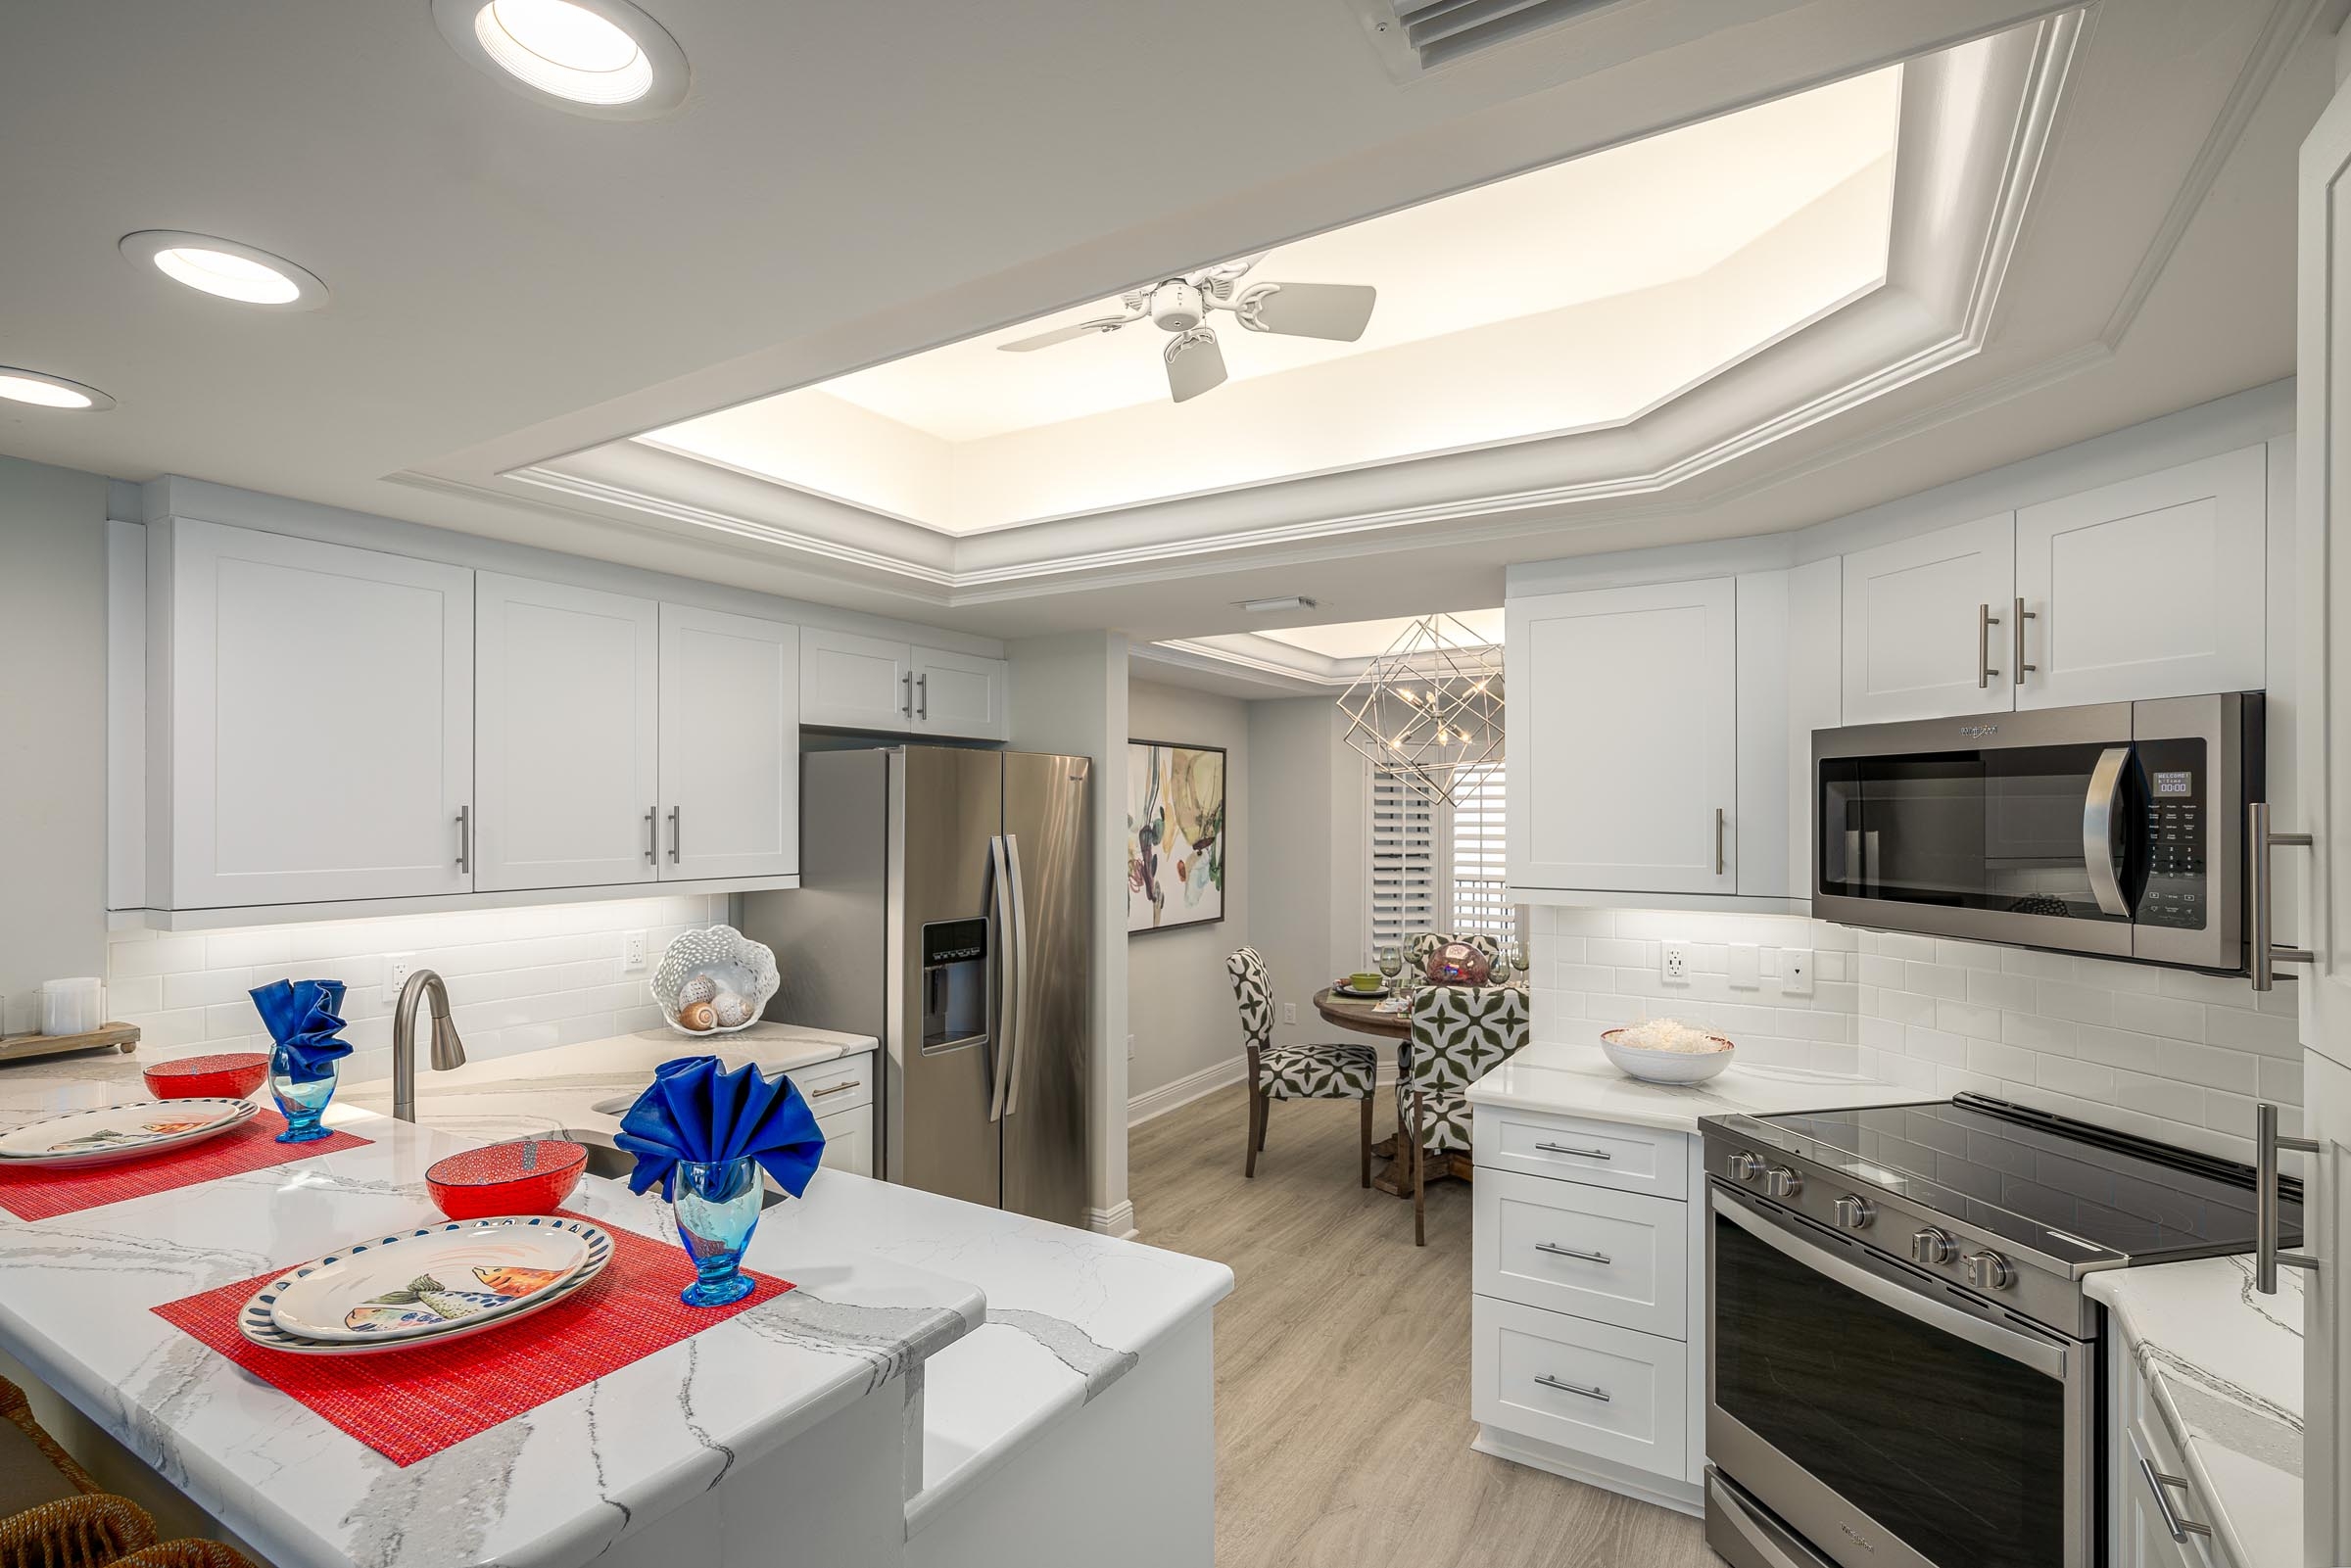 Picture of kitchen in the Egret model home